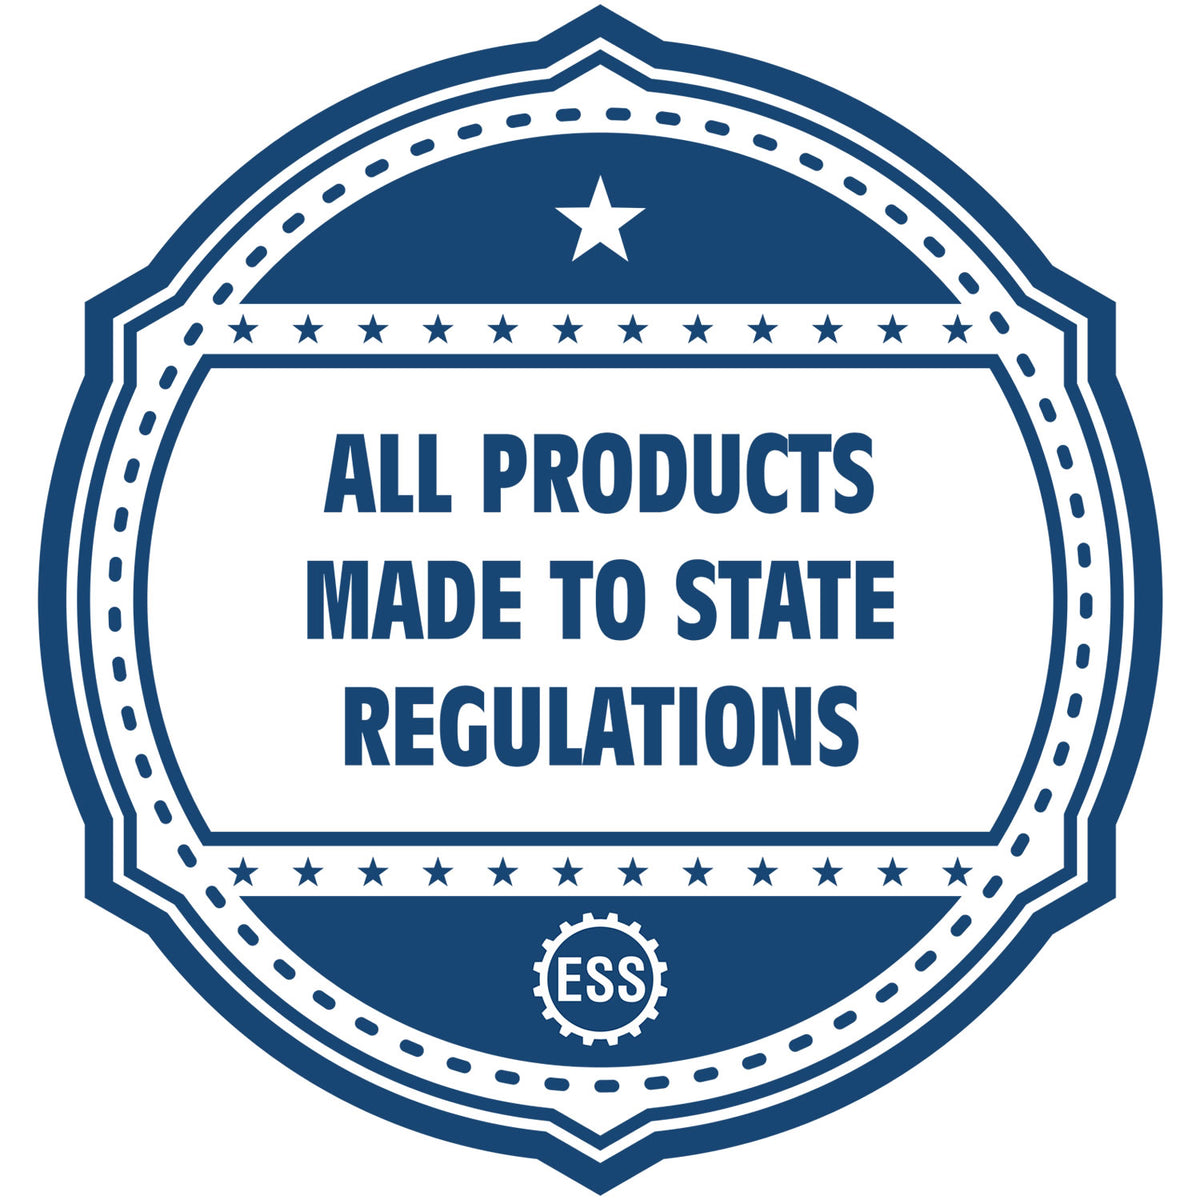 An icon or badge element for the Maine Engineer Desk Seal showing that this product is made in compliance with state regulations.